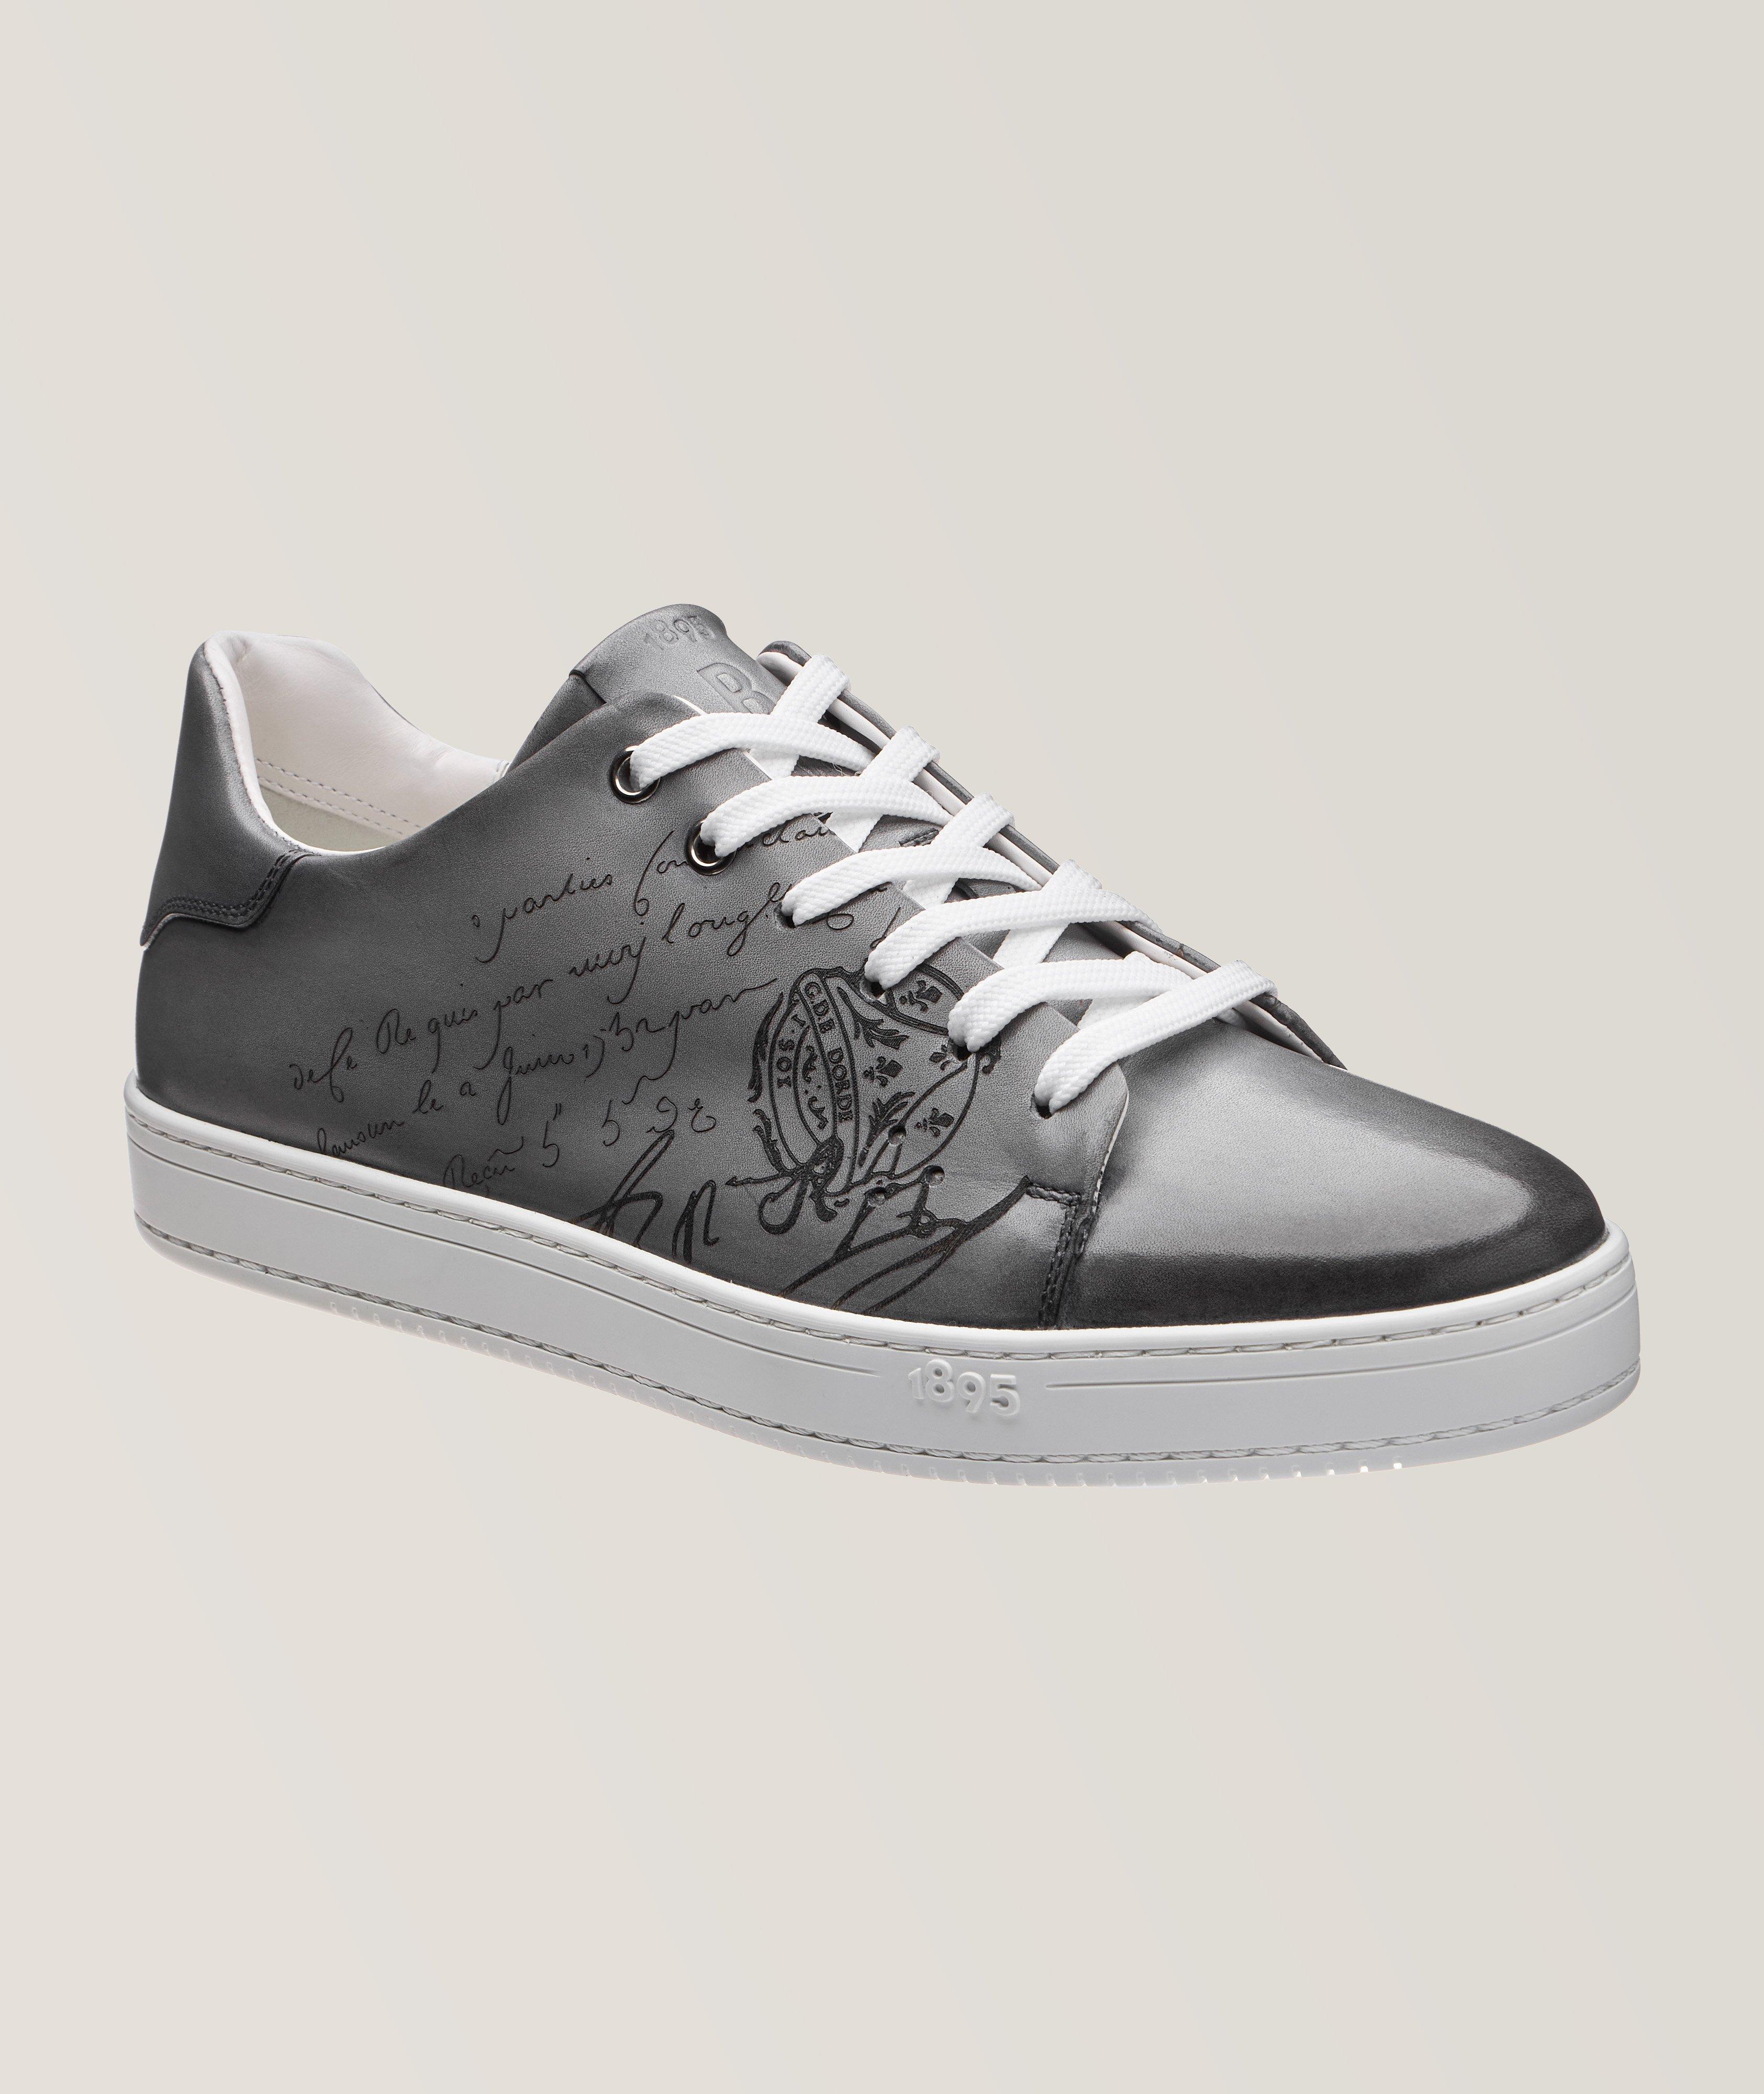 Playtime Scritto Leather Sneaker image 0